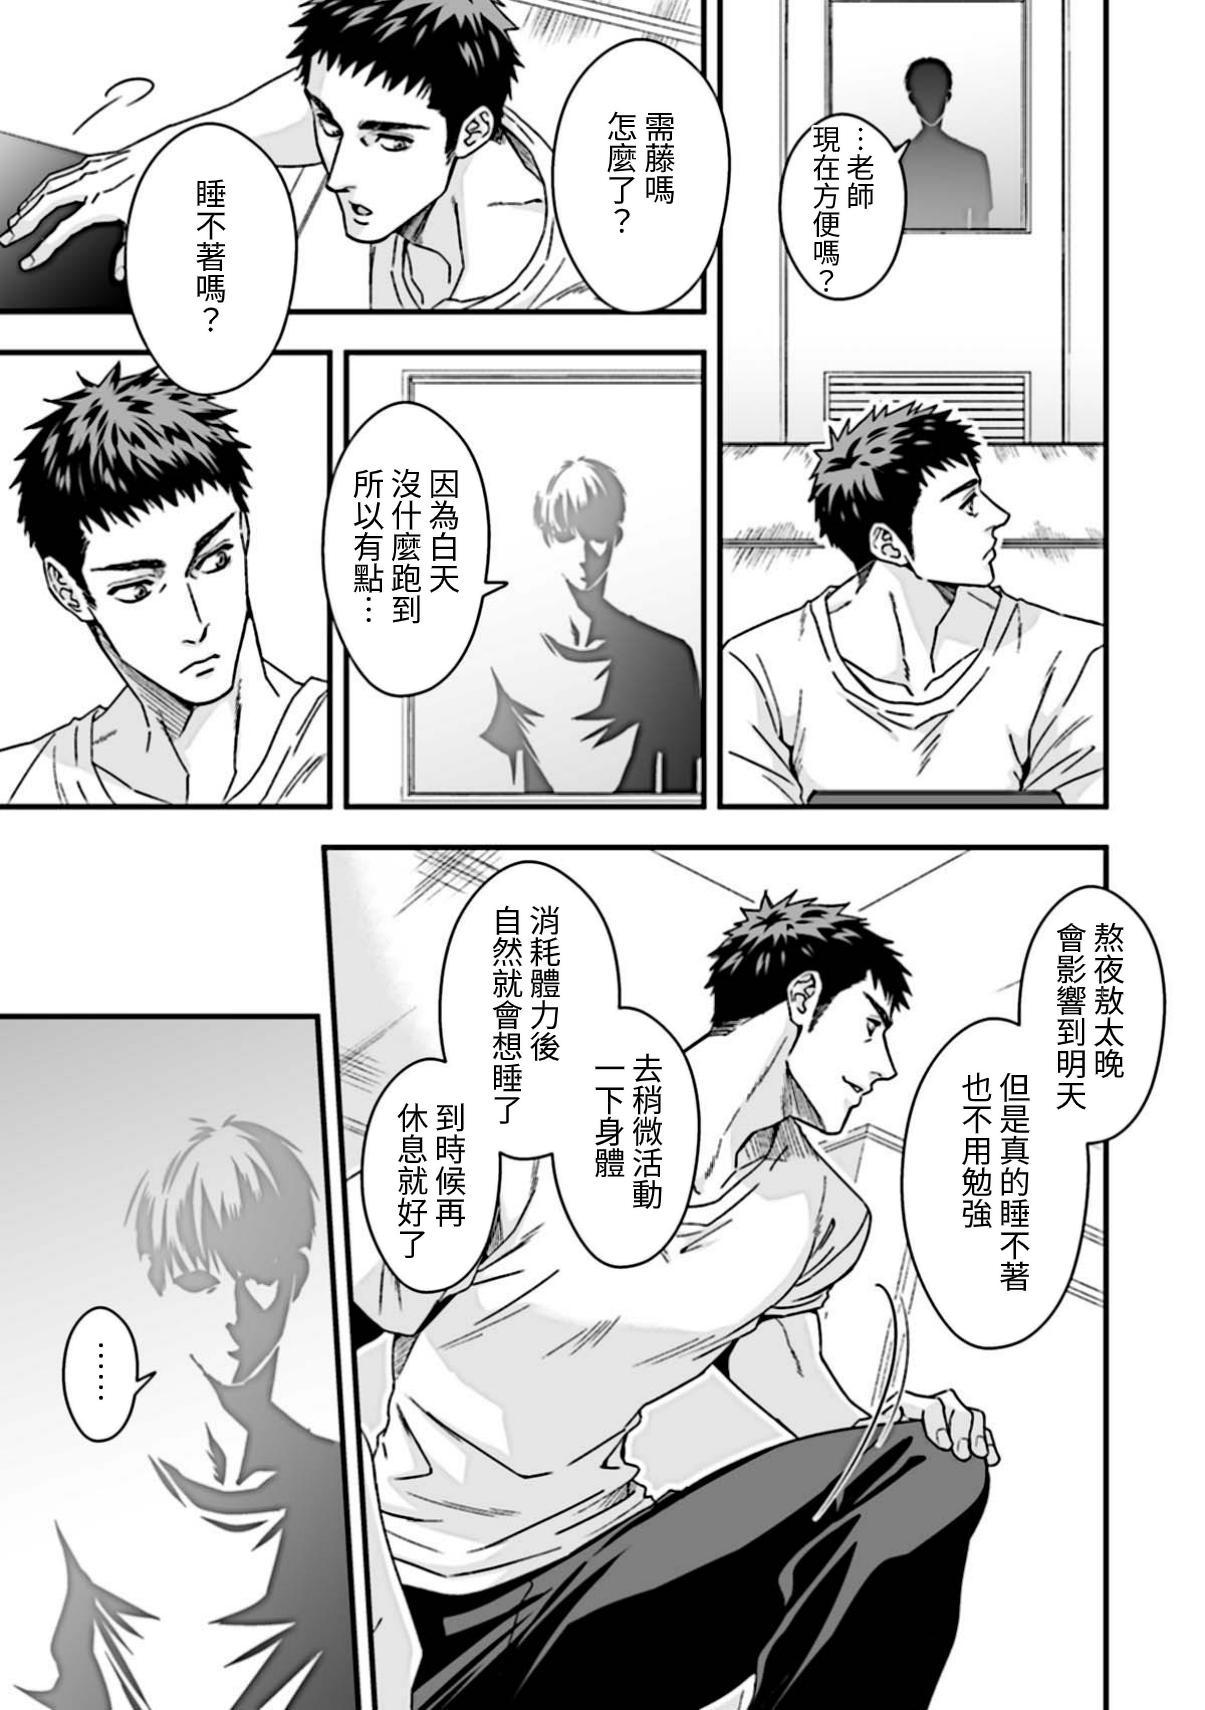 Transexual 體育教師2 Sis - Page 5